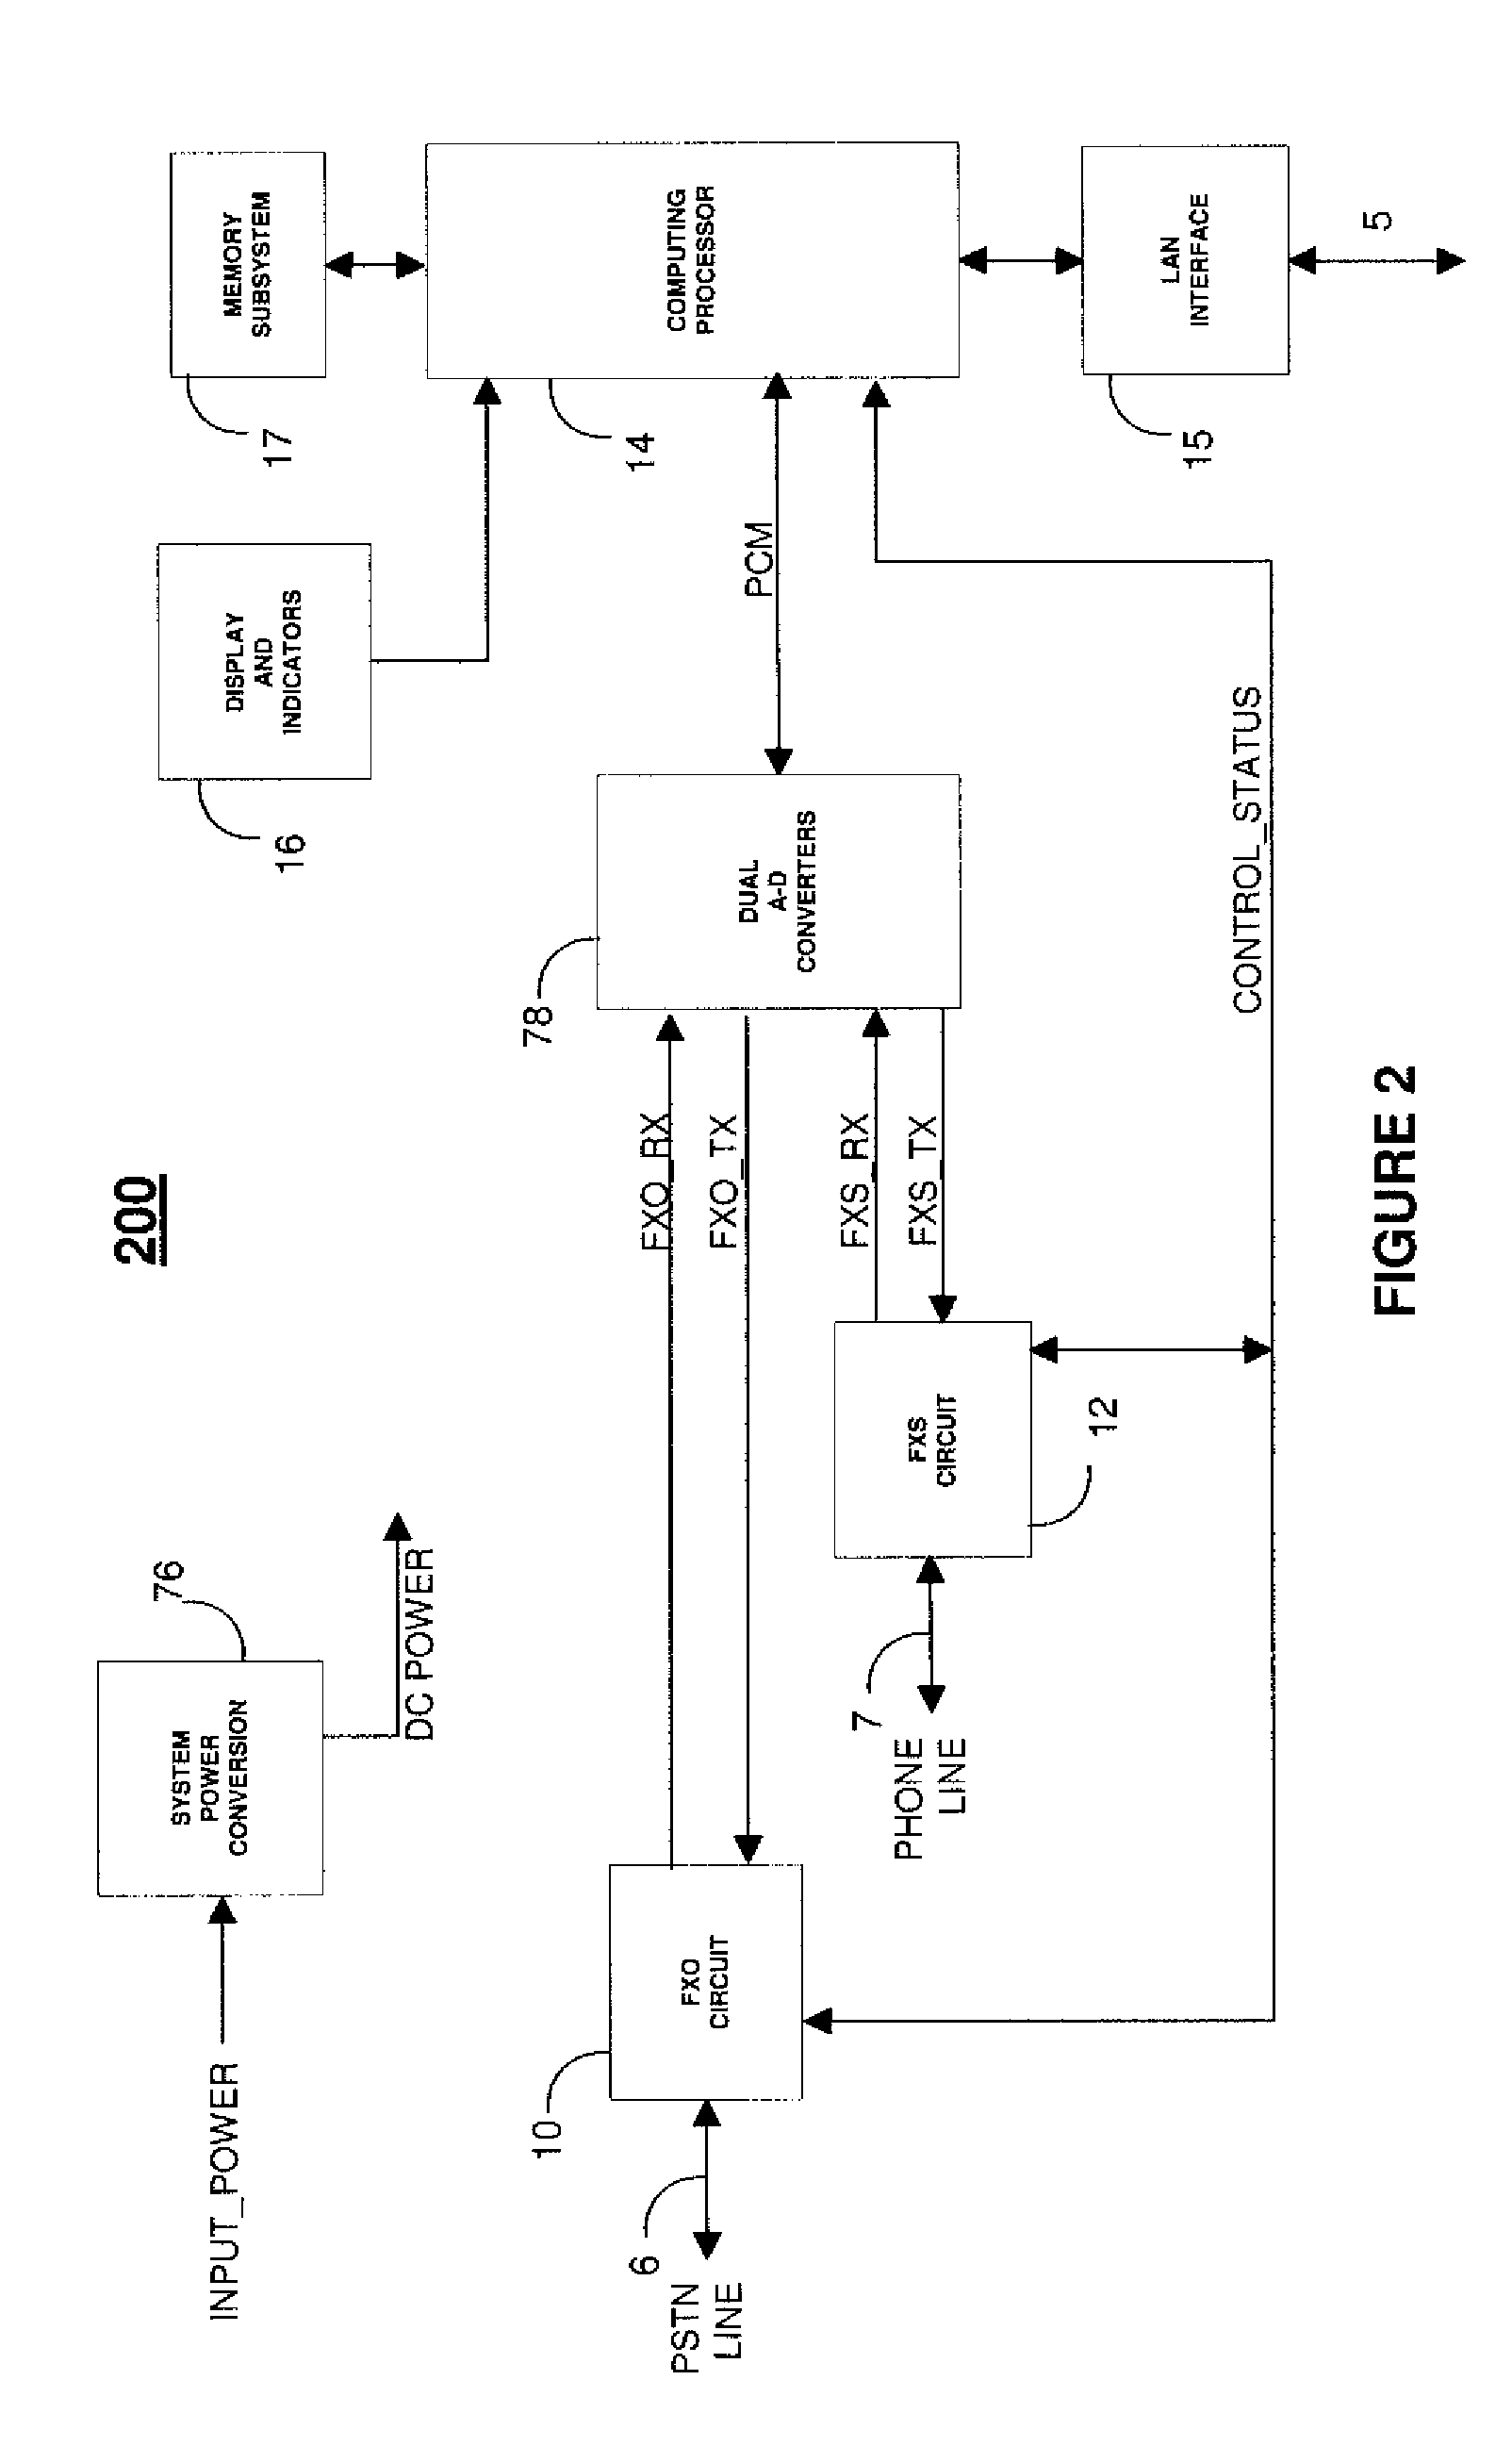 Enhanced Telephony Adapter Device and Methods